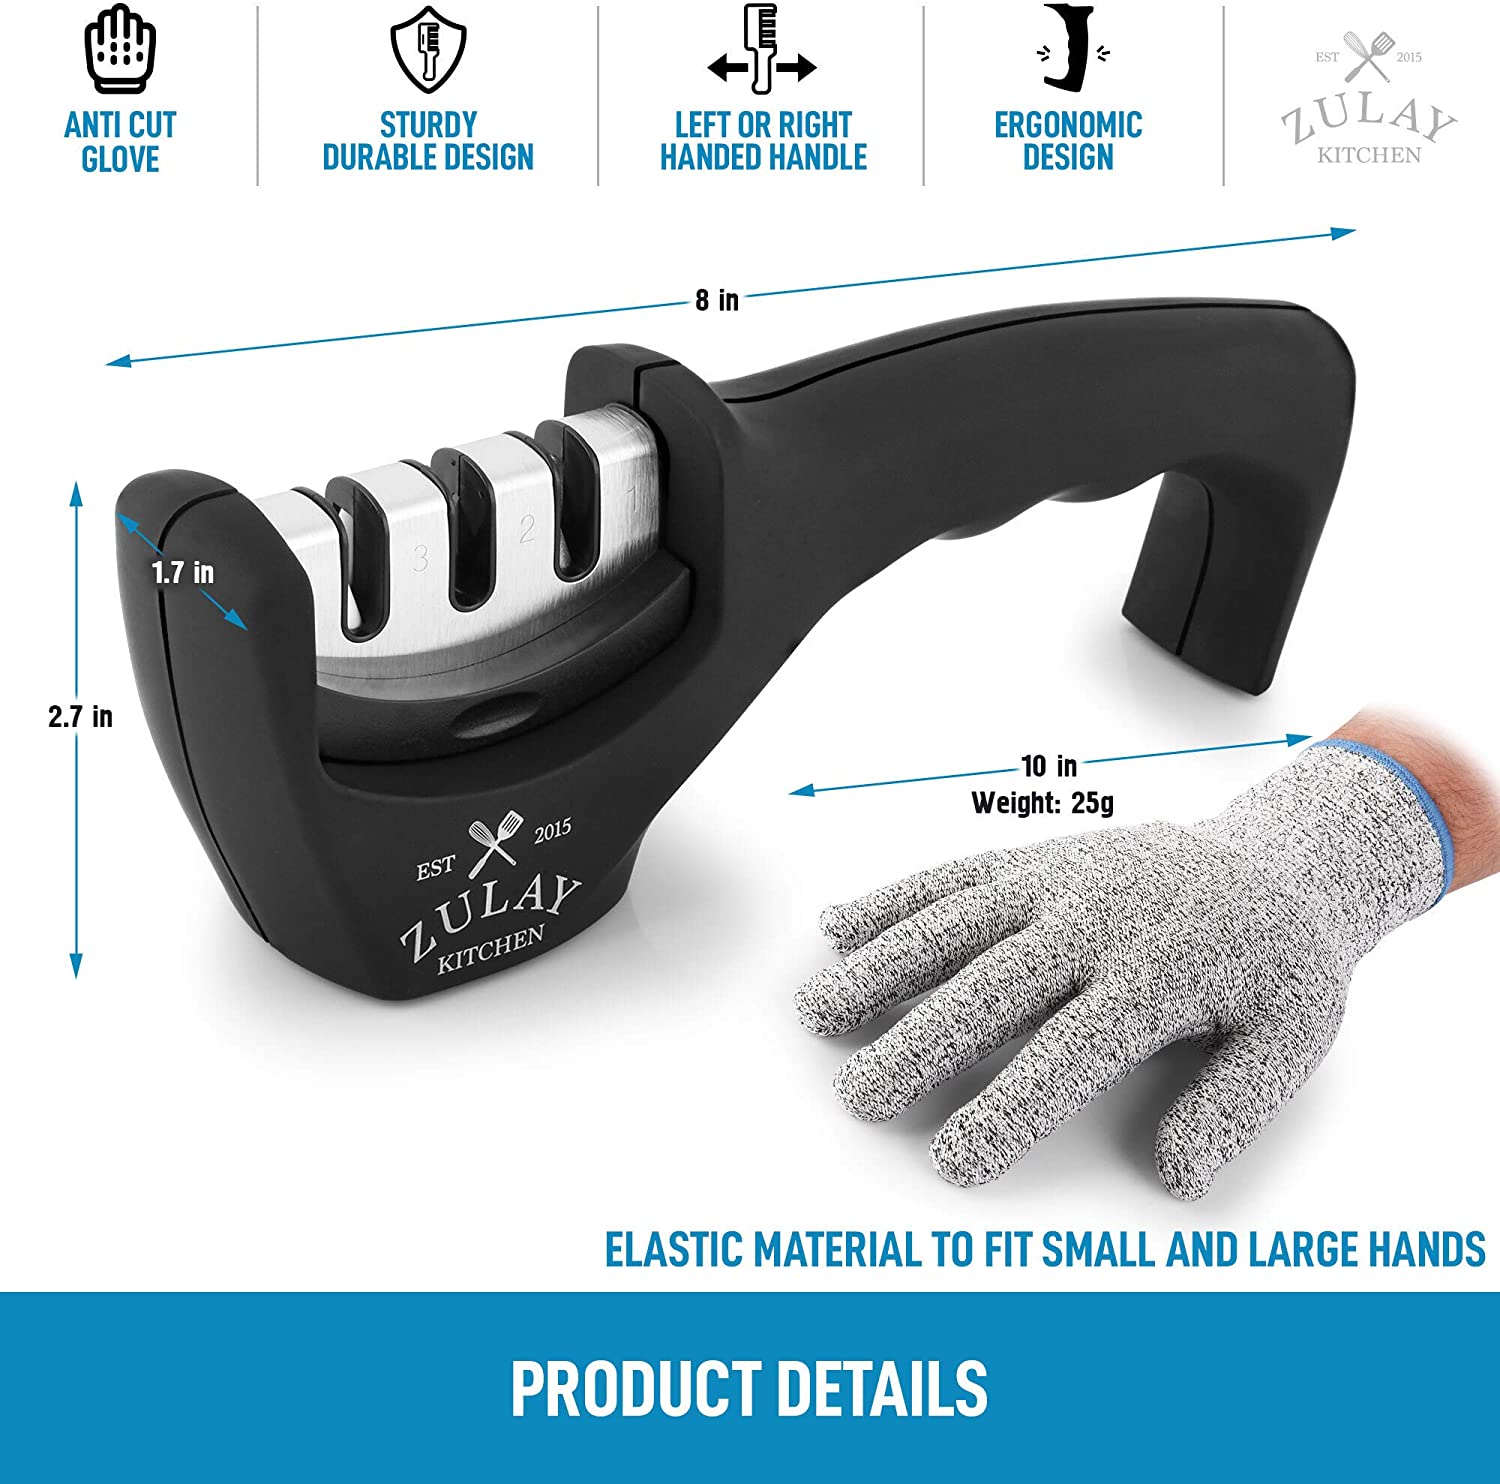 https://cdn.shopify.com/s/files/1/0091/0593/2324/products/zulay-kitchen-3-stage-knife-sharpener-cut-resistant-glovezulay-kitchen-3-stage-knife-sharpener-cut-resistant-glovezulay-kitchenzulay-kitchenz-knf-shrpnr-glv-3-s-266009.jpg?v=1684848828&width=1500